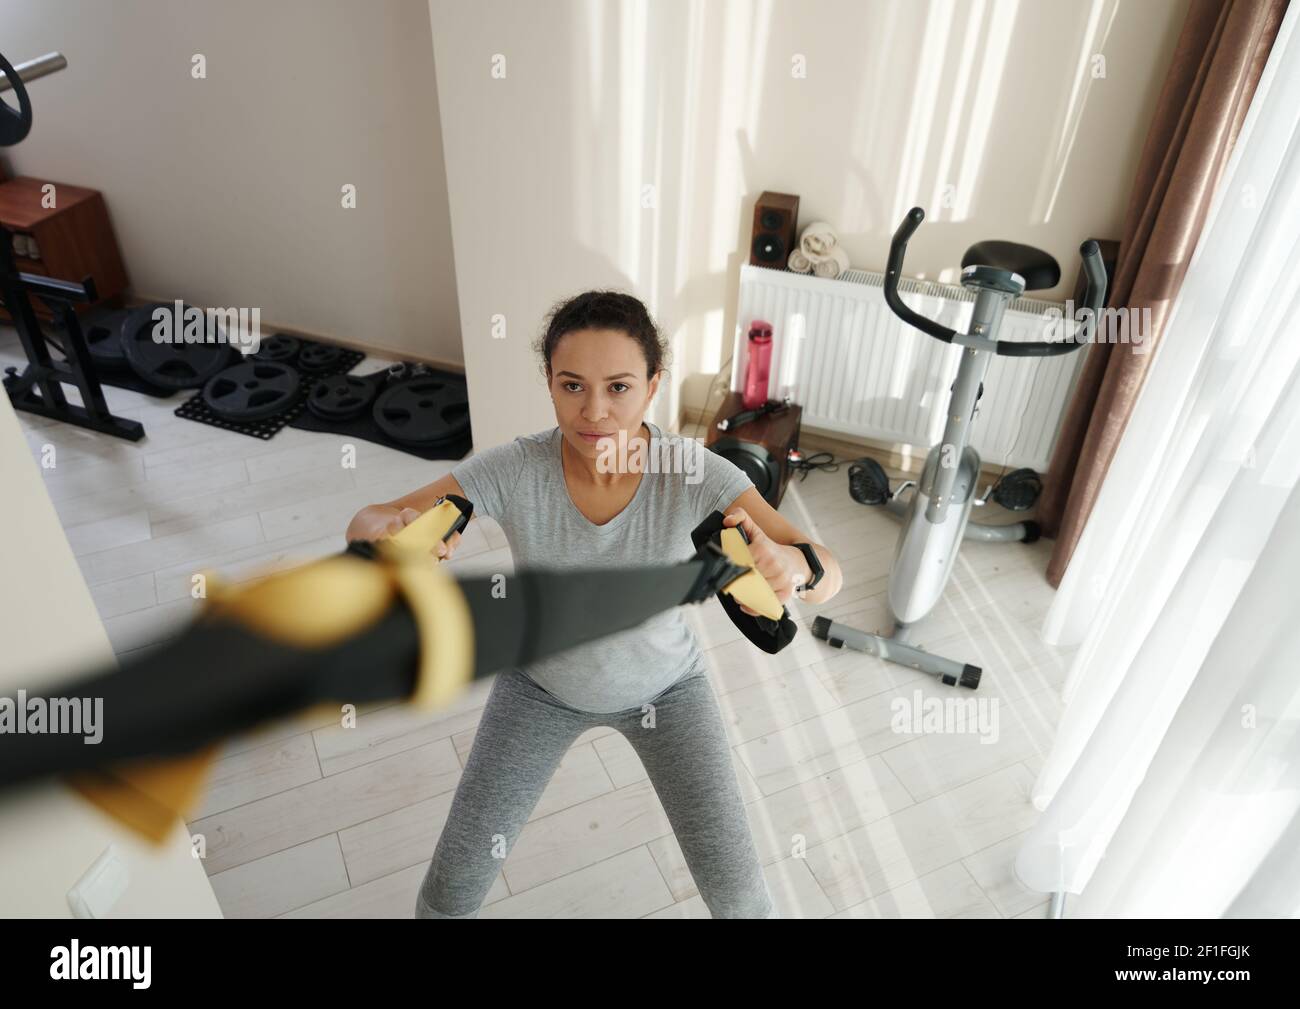 High angle view of athletic woman exercising at home with fitness straps. Home workout concept Stock Photo